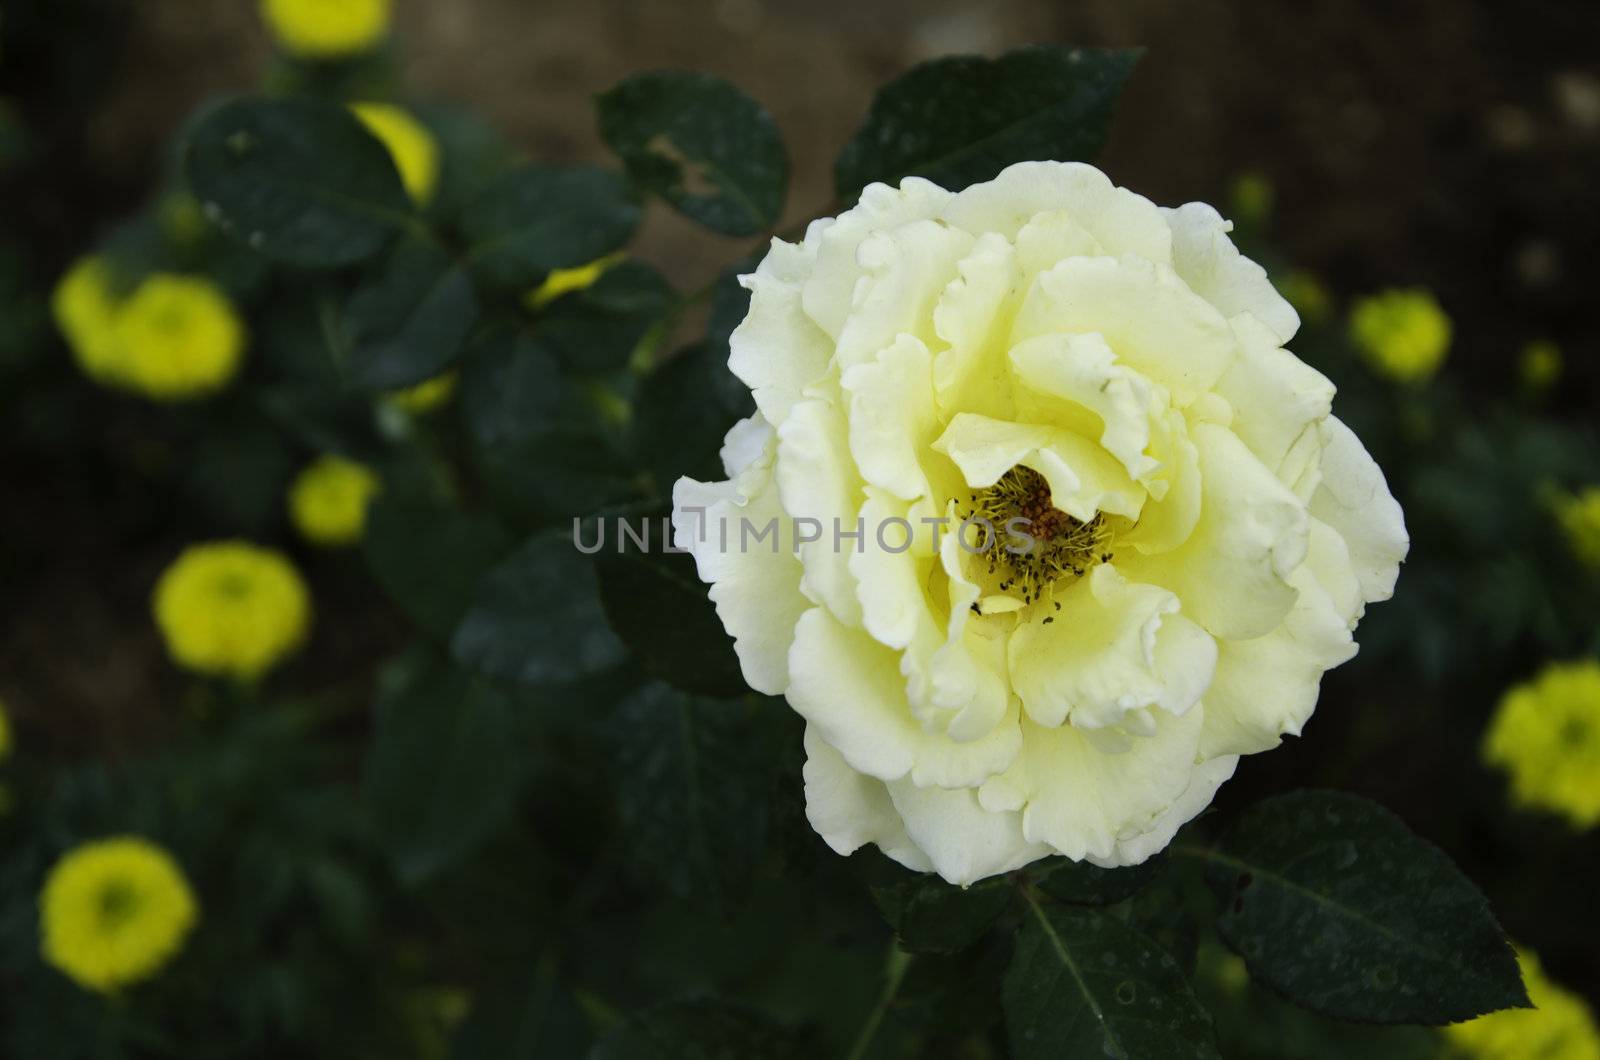 Close up of yellow rose flower blossom in garden by siraanamwong